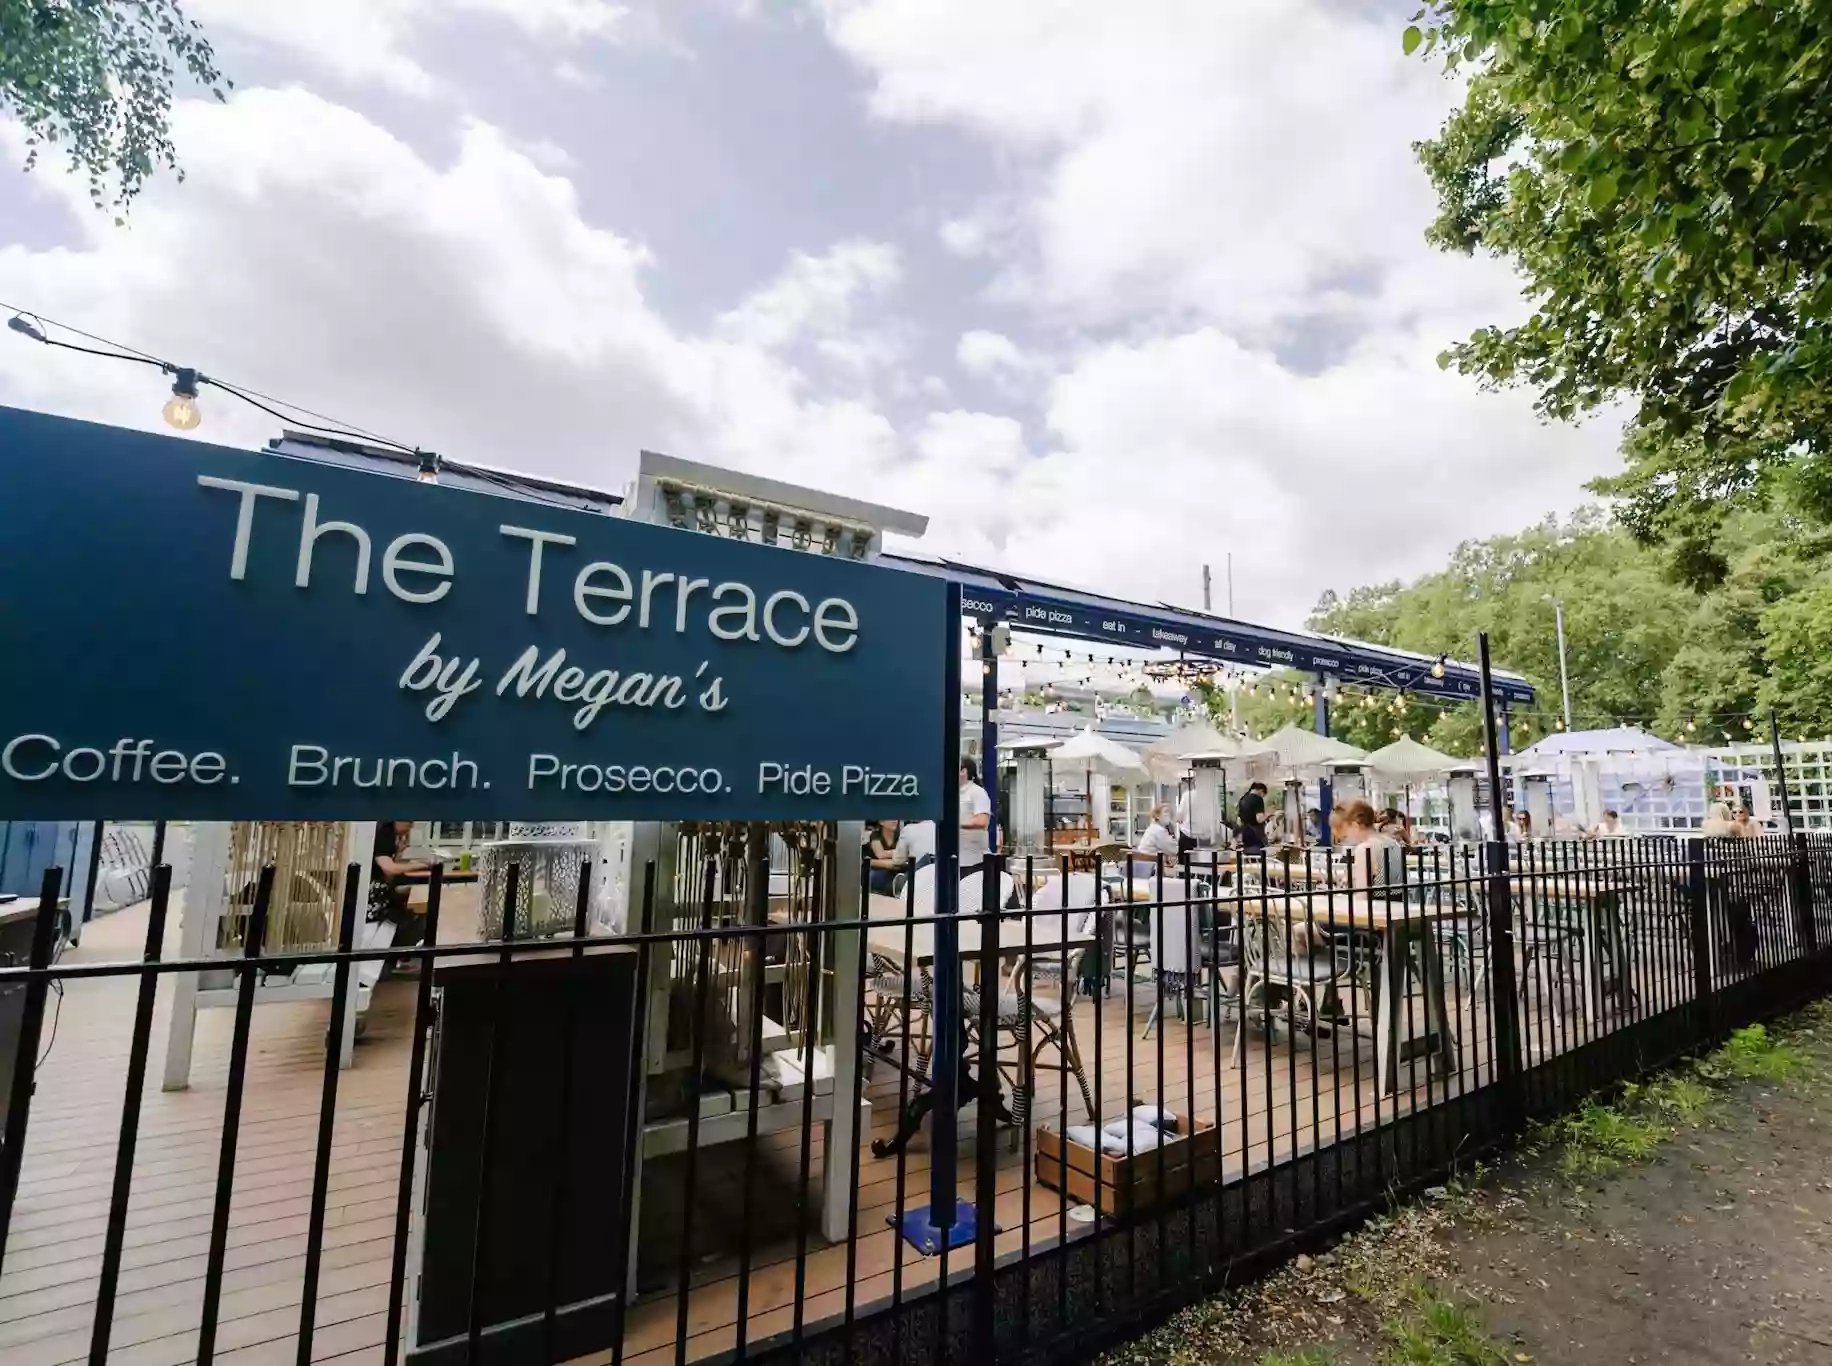 'The Terrace' Restaurant by Megan's (coming soon)